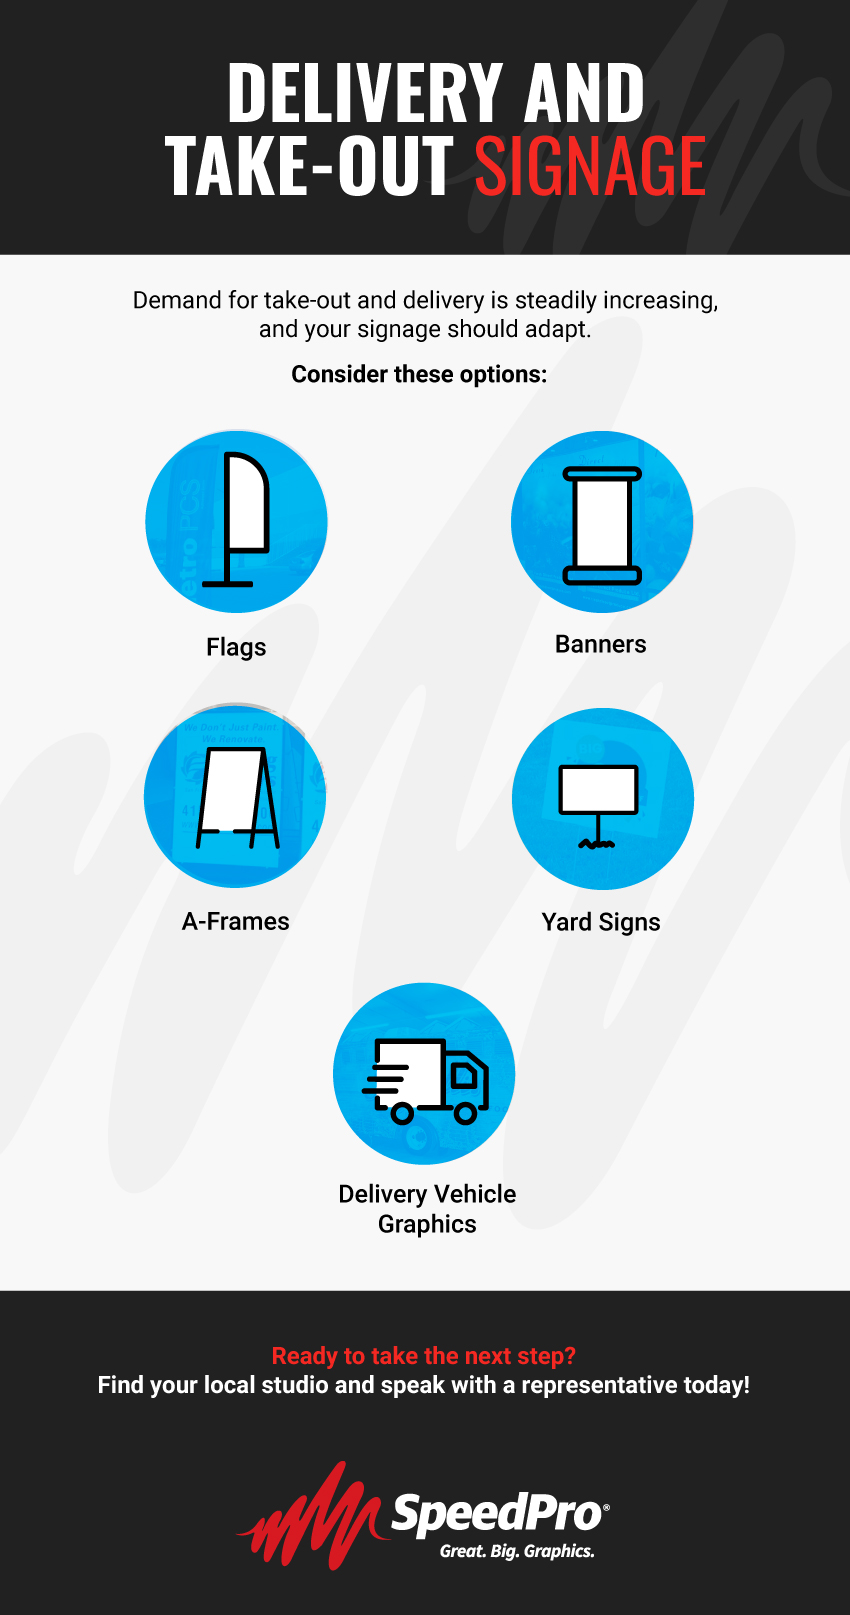 Delivery and Take-Out Signage [Infographic]